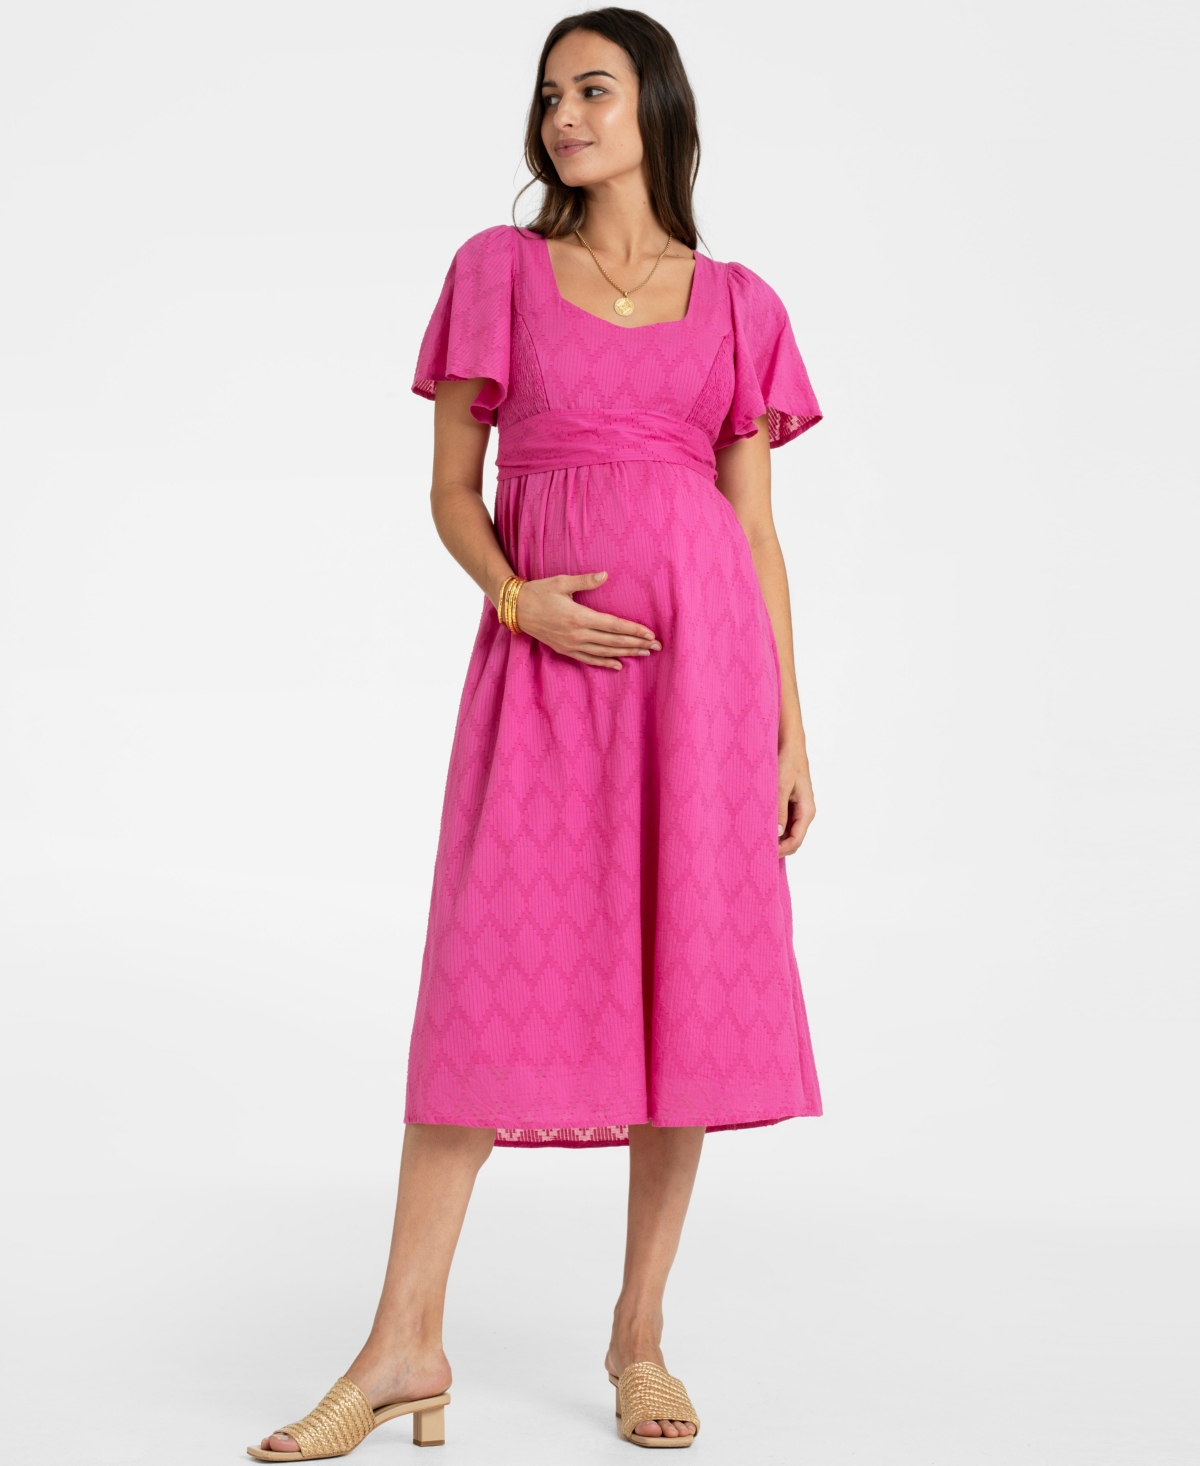 Seraphine Women's Cotton Broderie Maternity And Nursing Dress In Pink